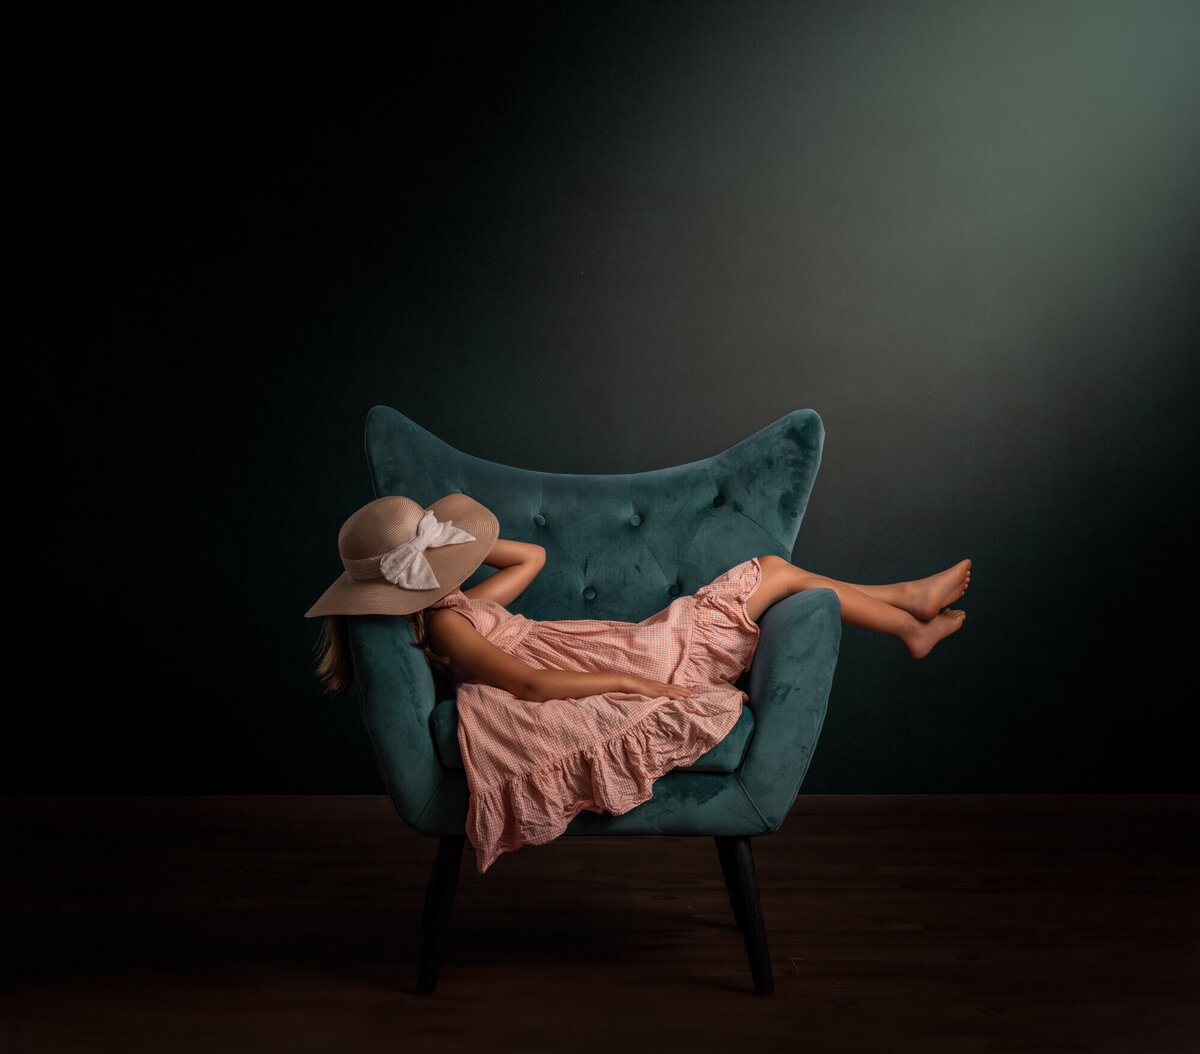 A little girl in an orange dress napping in a green chair with a hat over her eyes and light pouring in above her